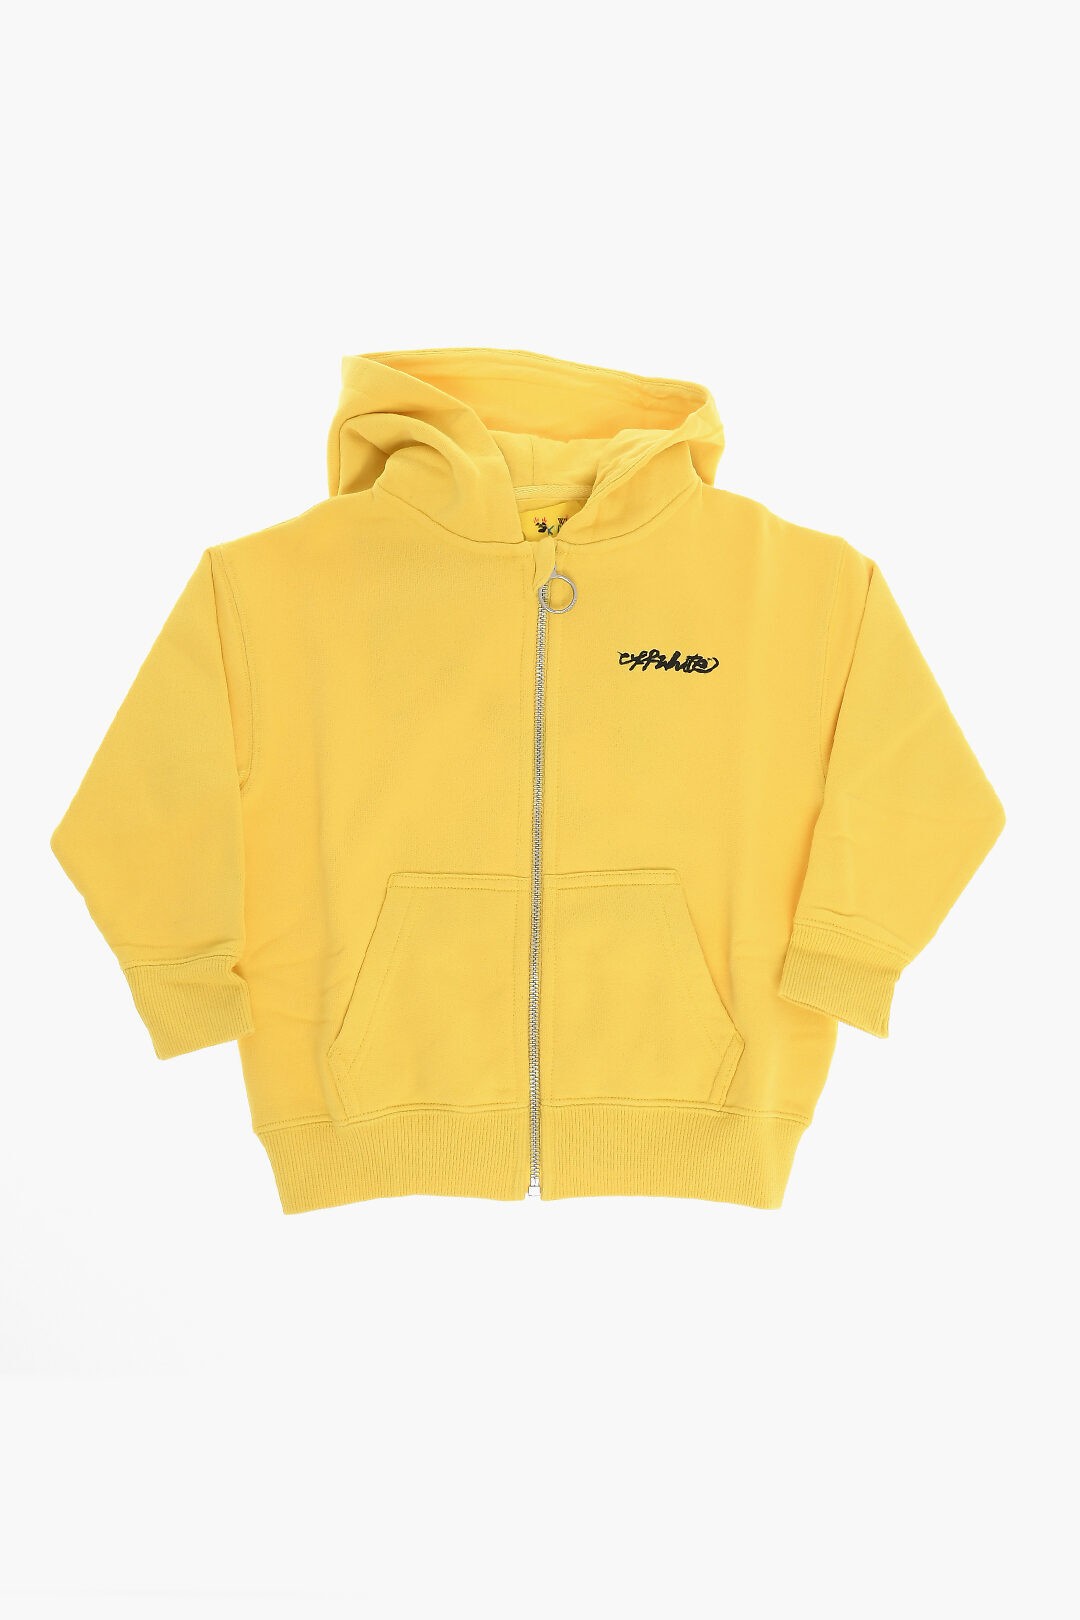 OFF-WHITE オフ ホワイト Yellow トレーナー OBBE001F21FLE0041810 ボーイズ HOODIE WITH ZIP CLOSURE AND LETTERING LOGO  dk